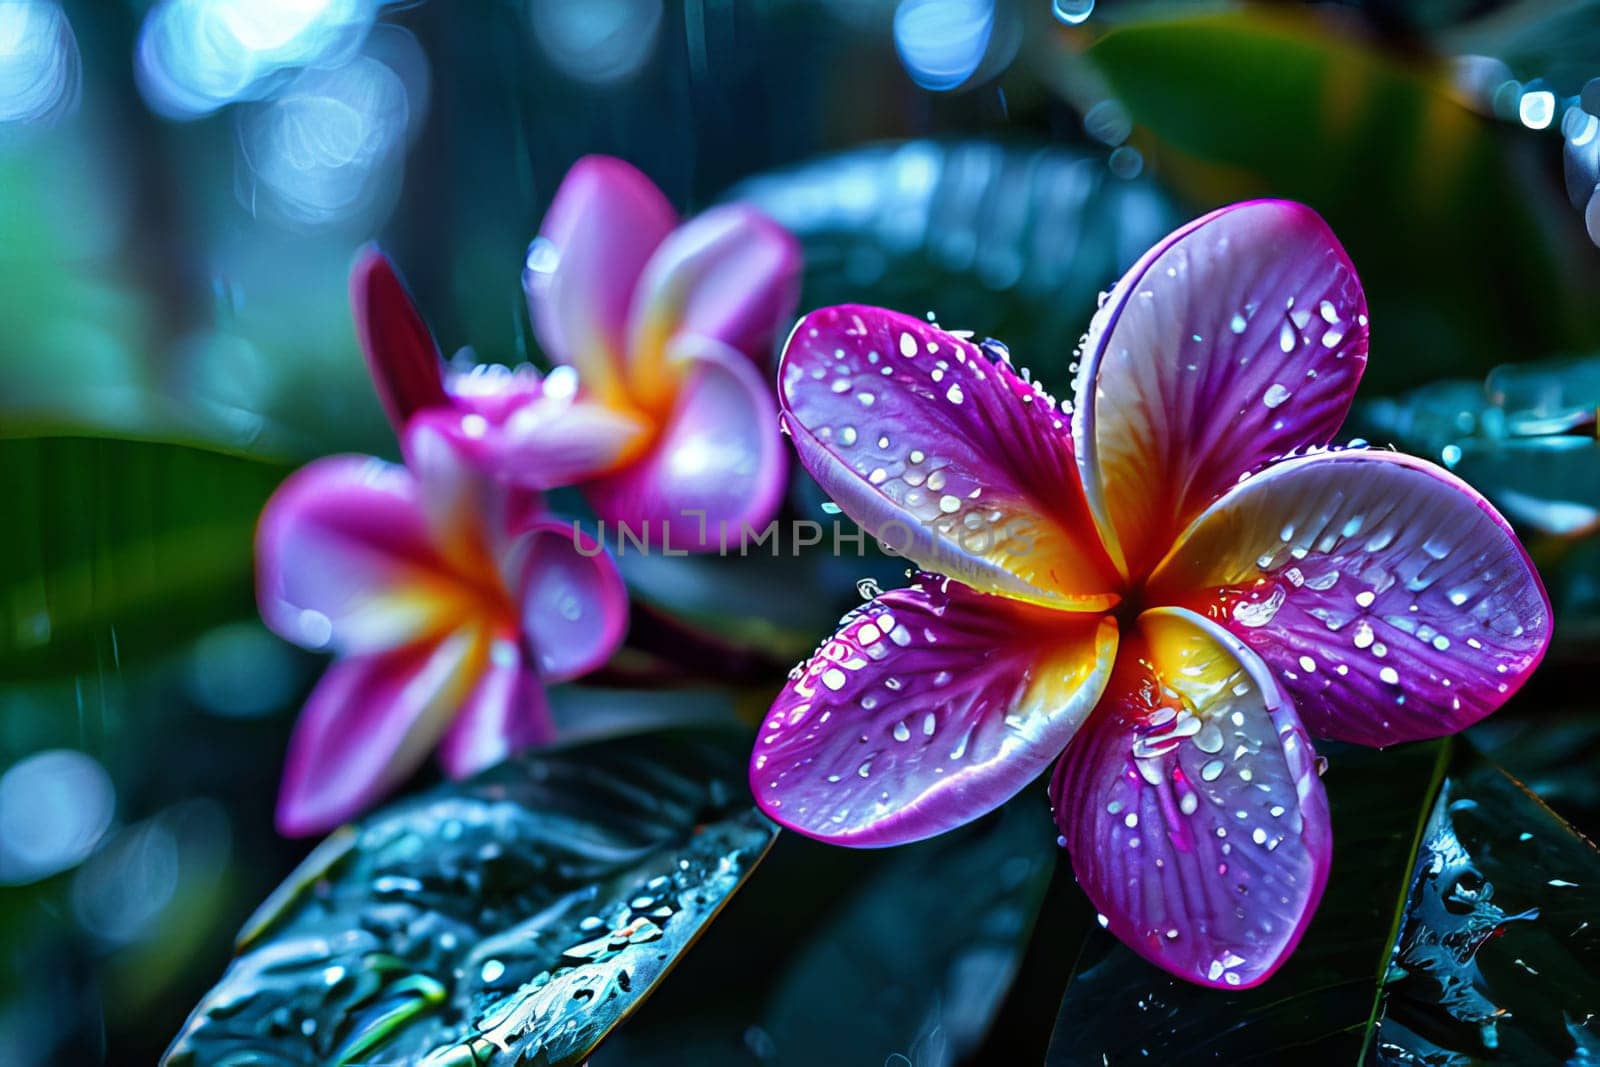 A vibrant pink plumeria flower with dew drops on delicate petals against a dark blue backdrop. The colors pop, creating a captivating contrast with a touch of natural beauty.